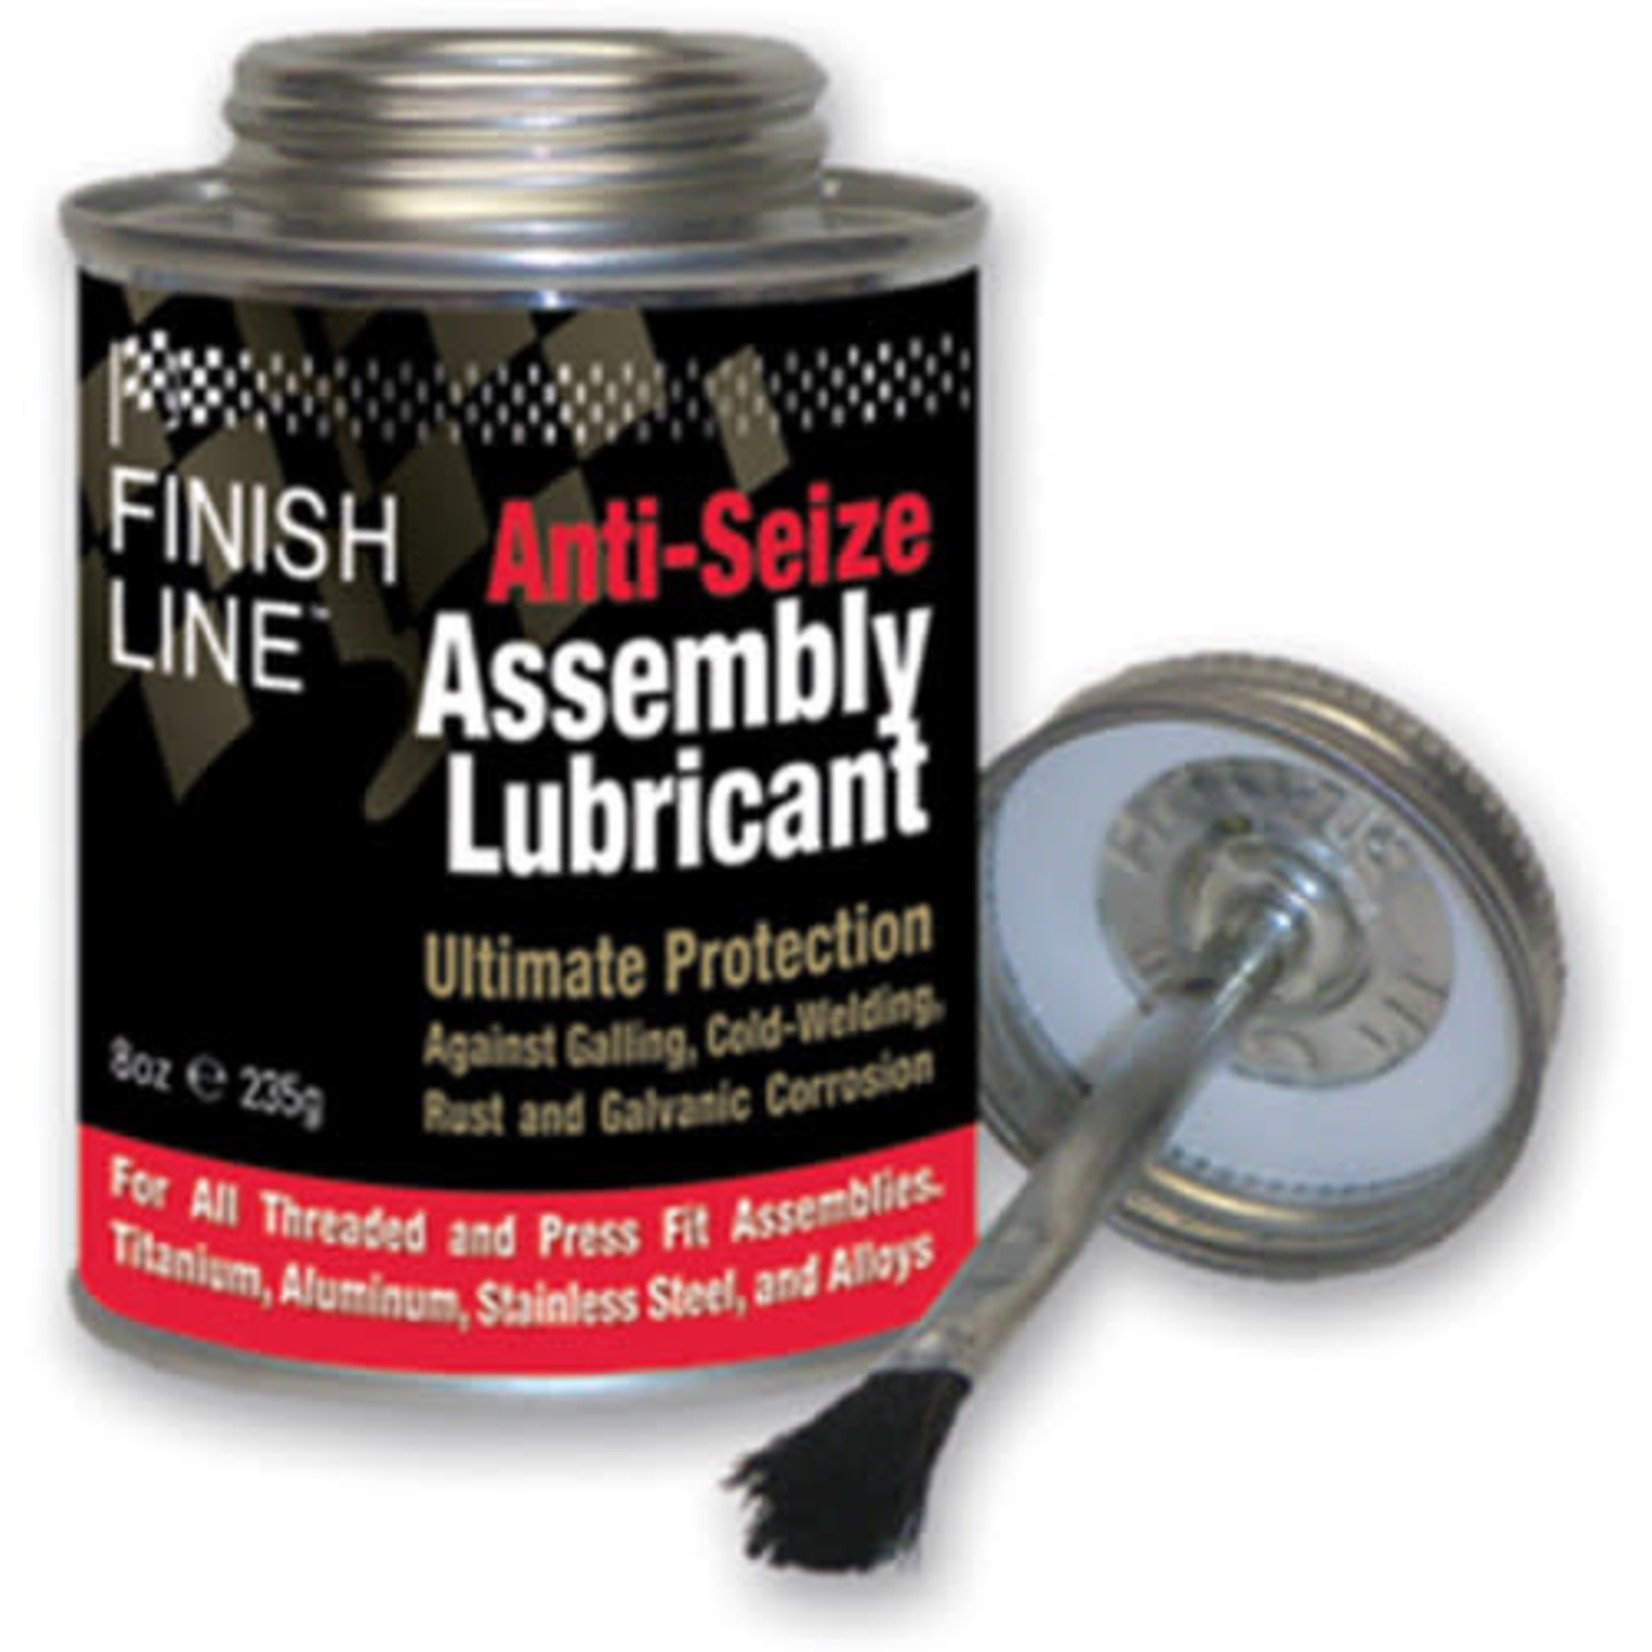 FINISH LINE ASSEMBLY LUBRICANT